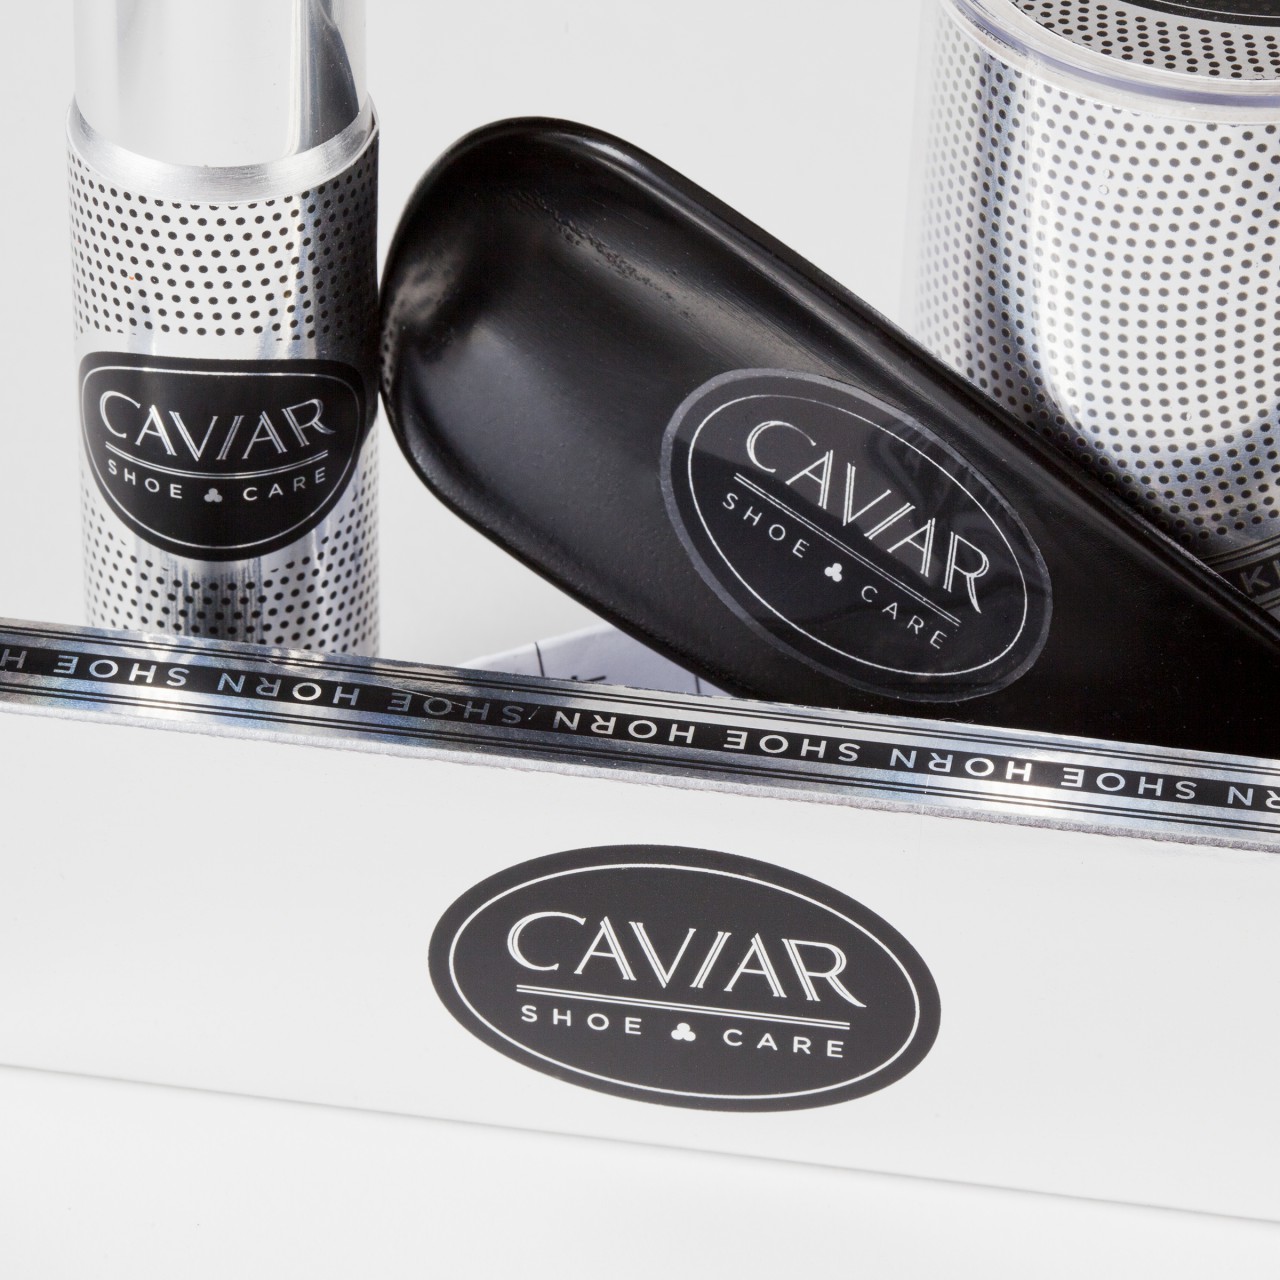 Image of Caviar Shoe Care logo package labels